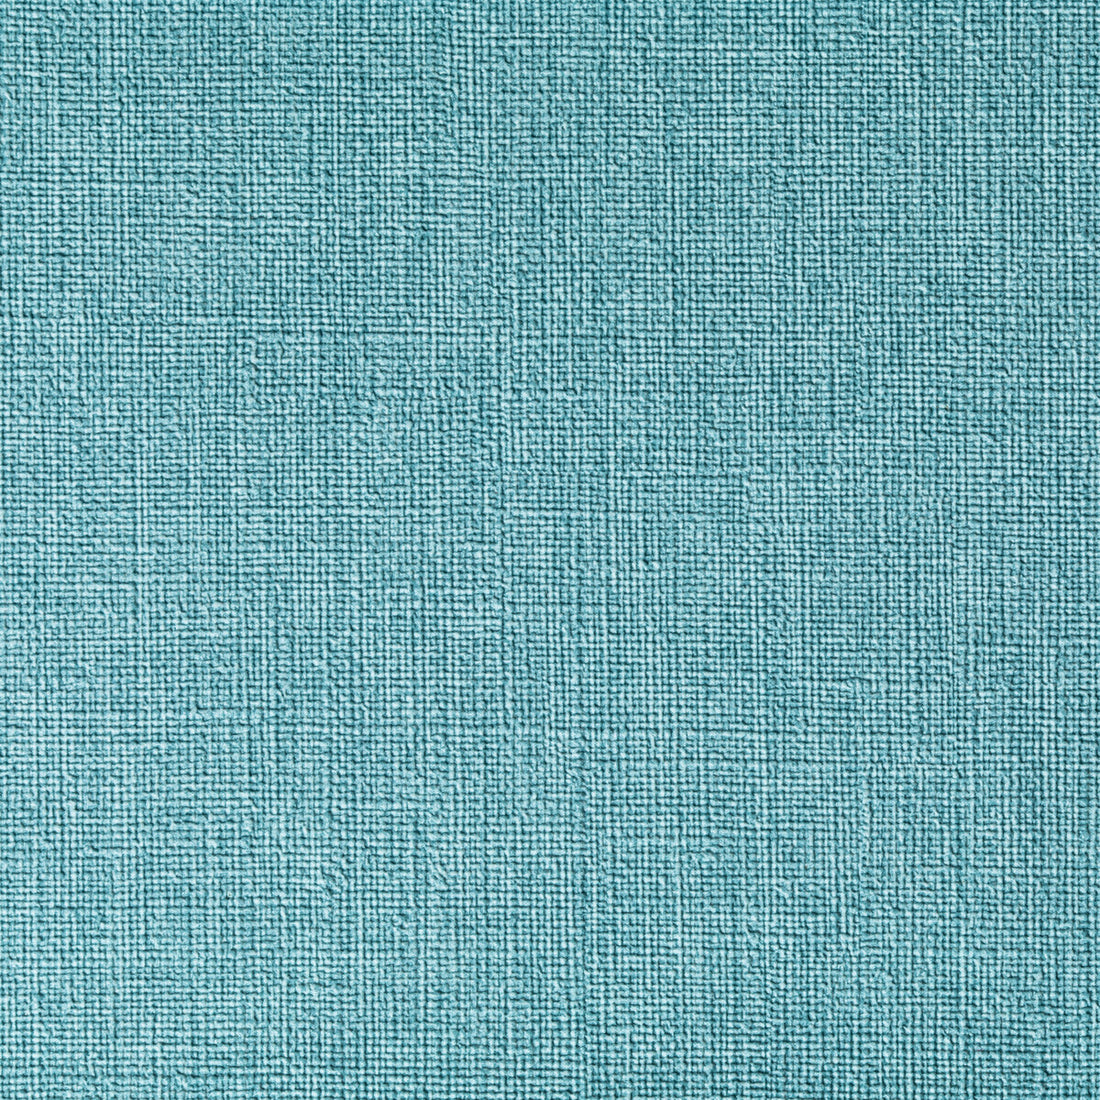 Caslin fabric in lagoon color - pattern CASLIN.3535.0 - by Kravet Contract in the Foundations / Value collection